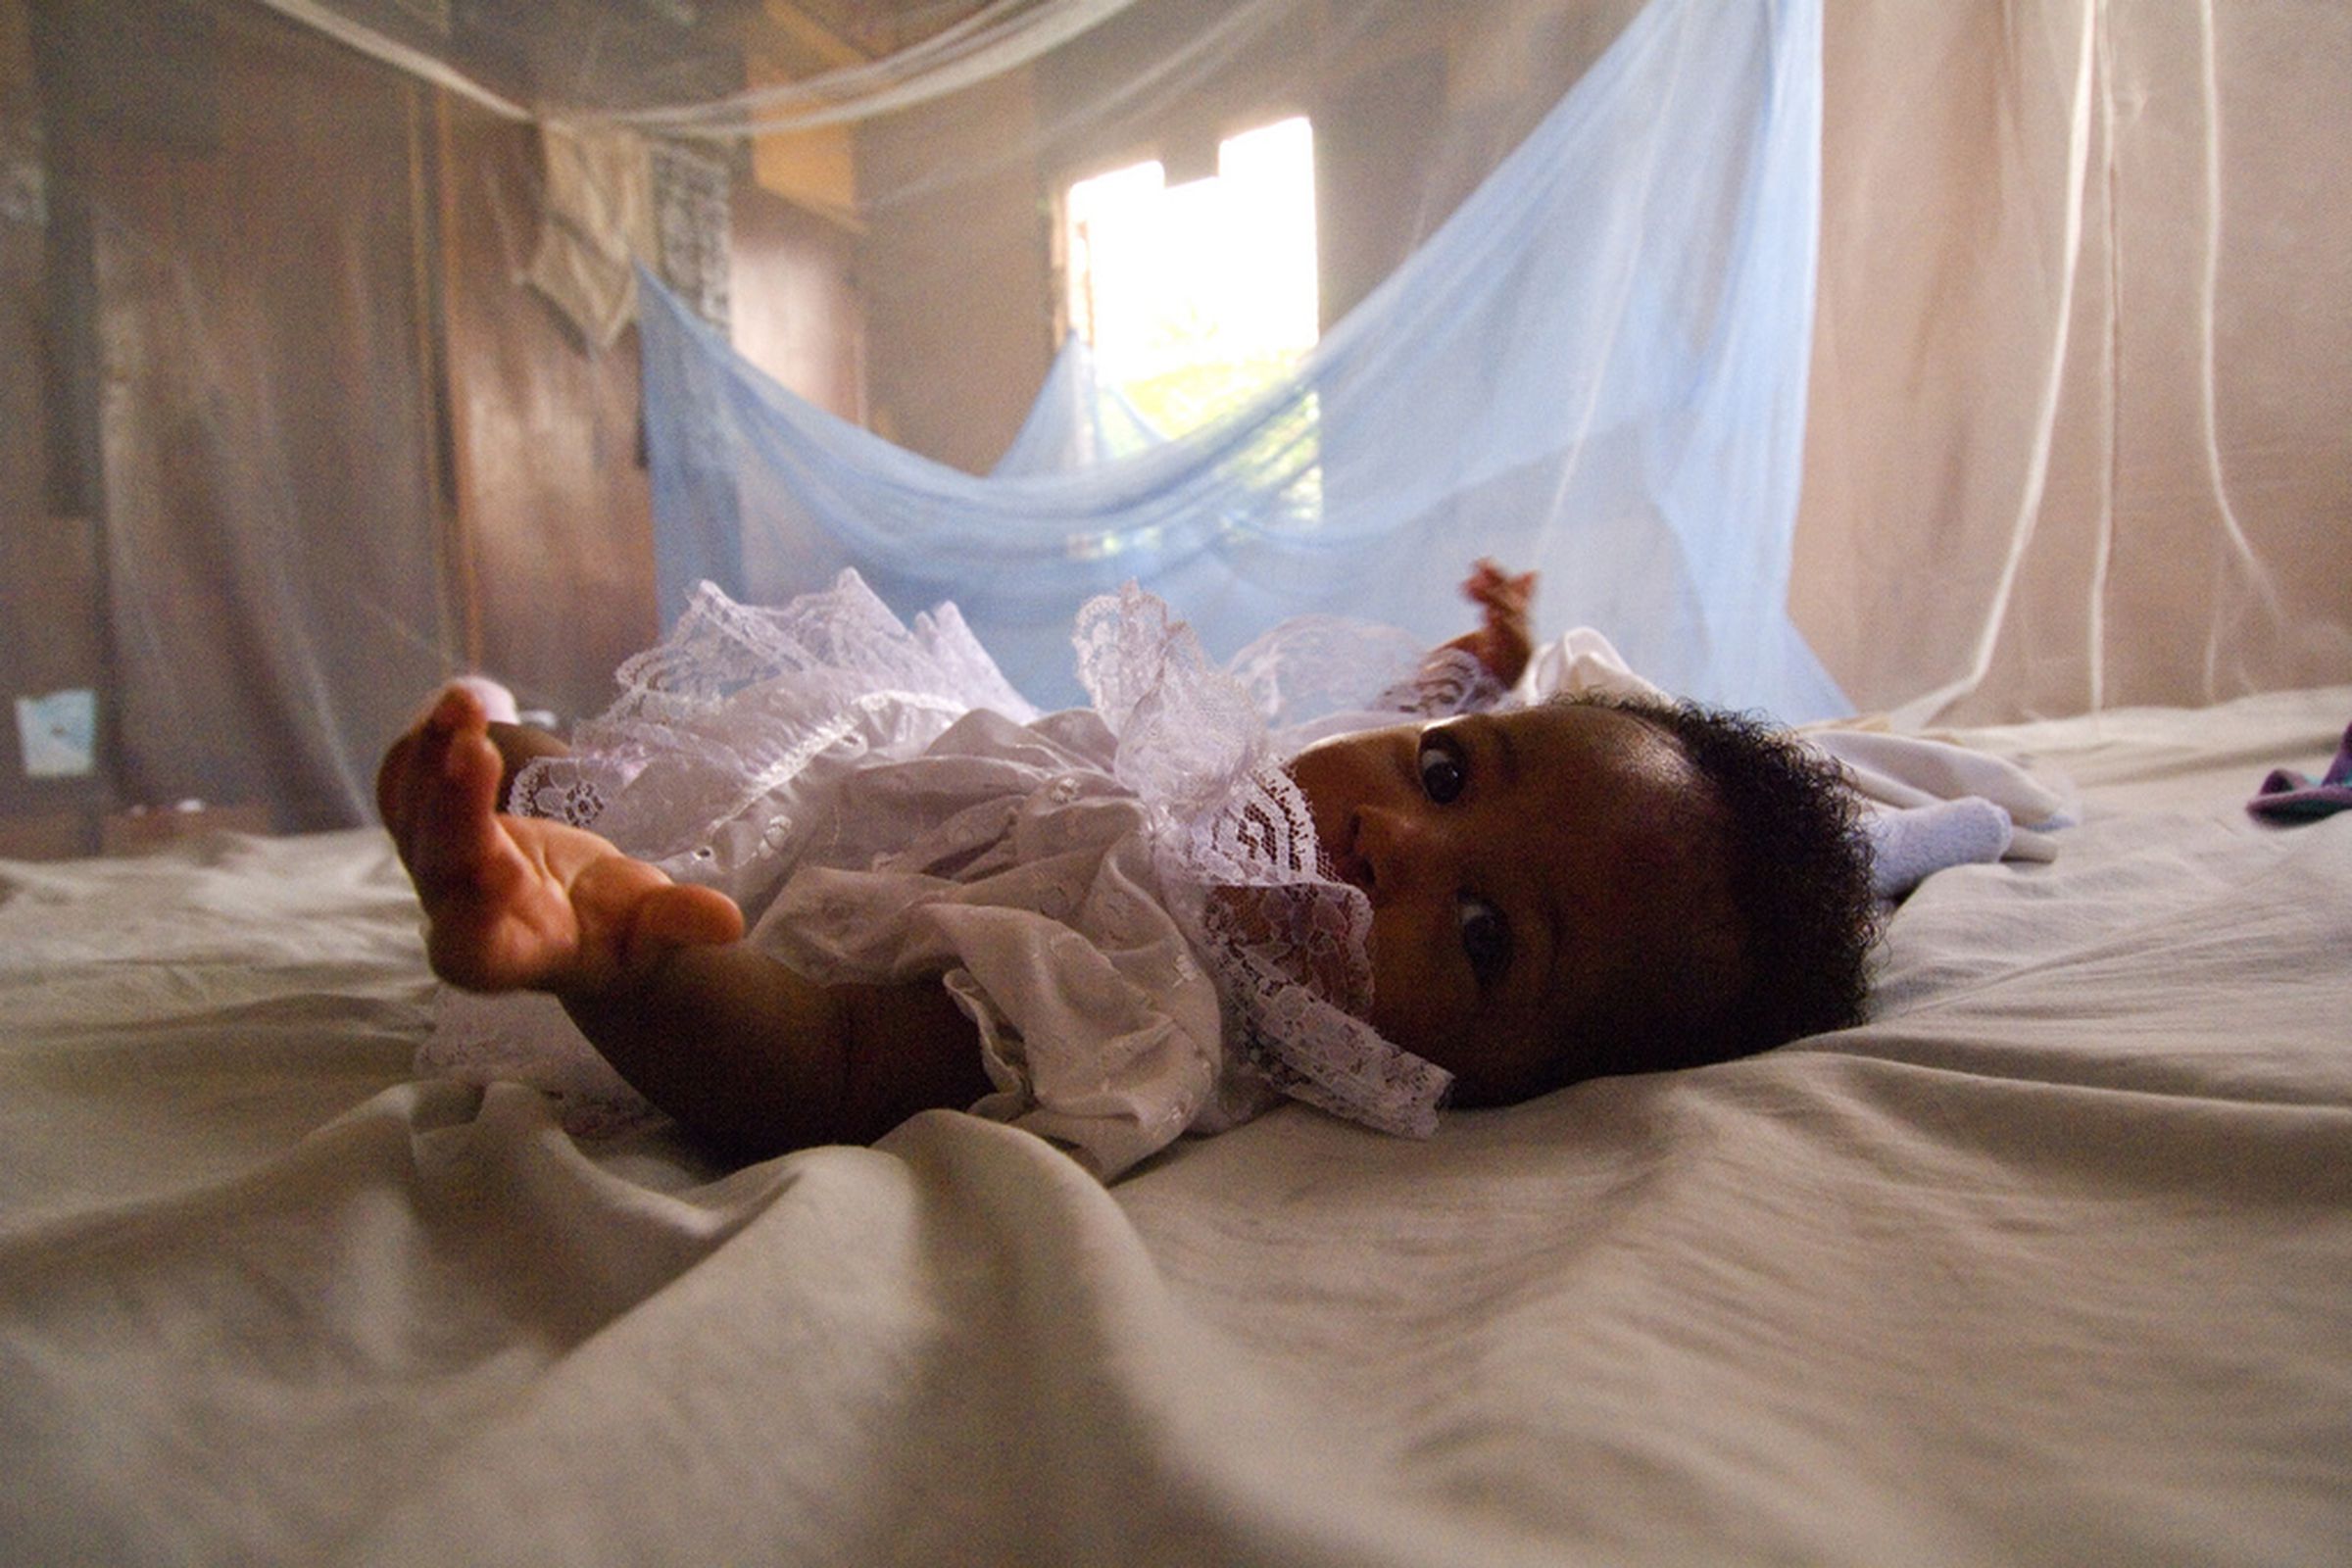 Infant surrounded by malaria bed net